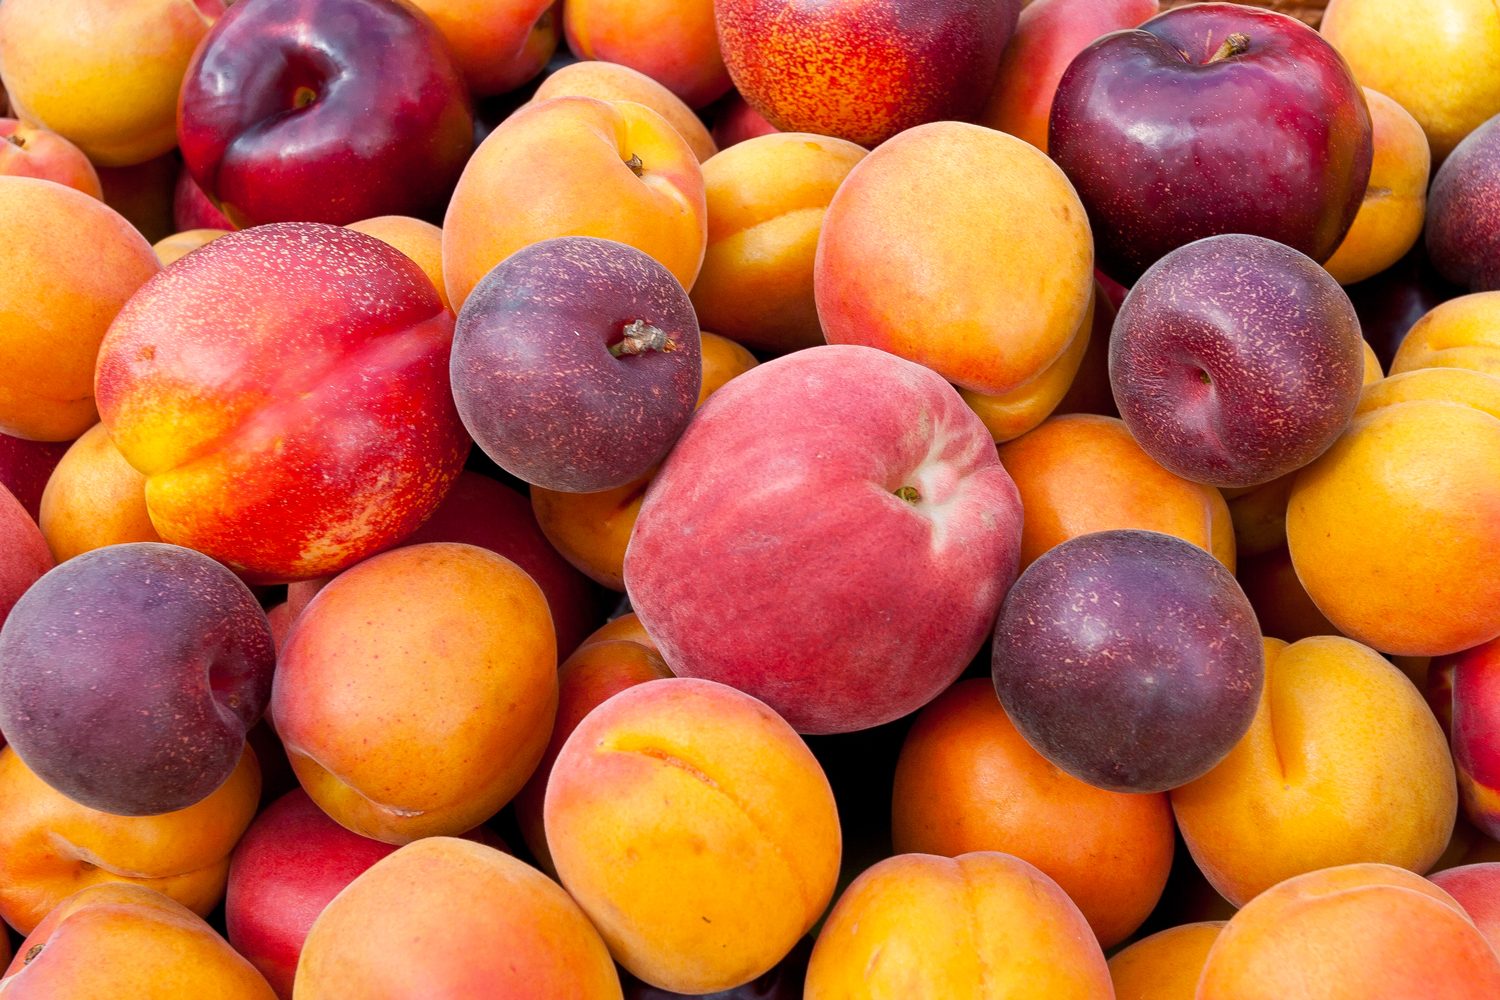 FDA Warning: Popular Fruit Sold Nationally Could Be Contaminated with Listeria